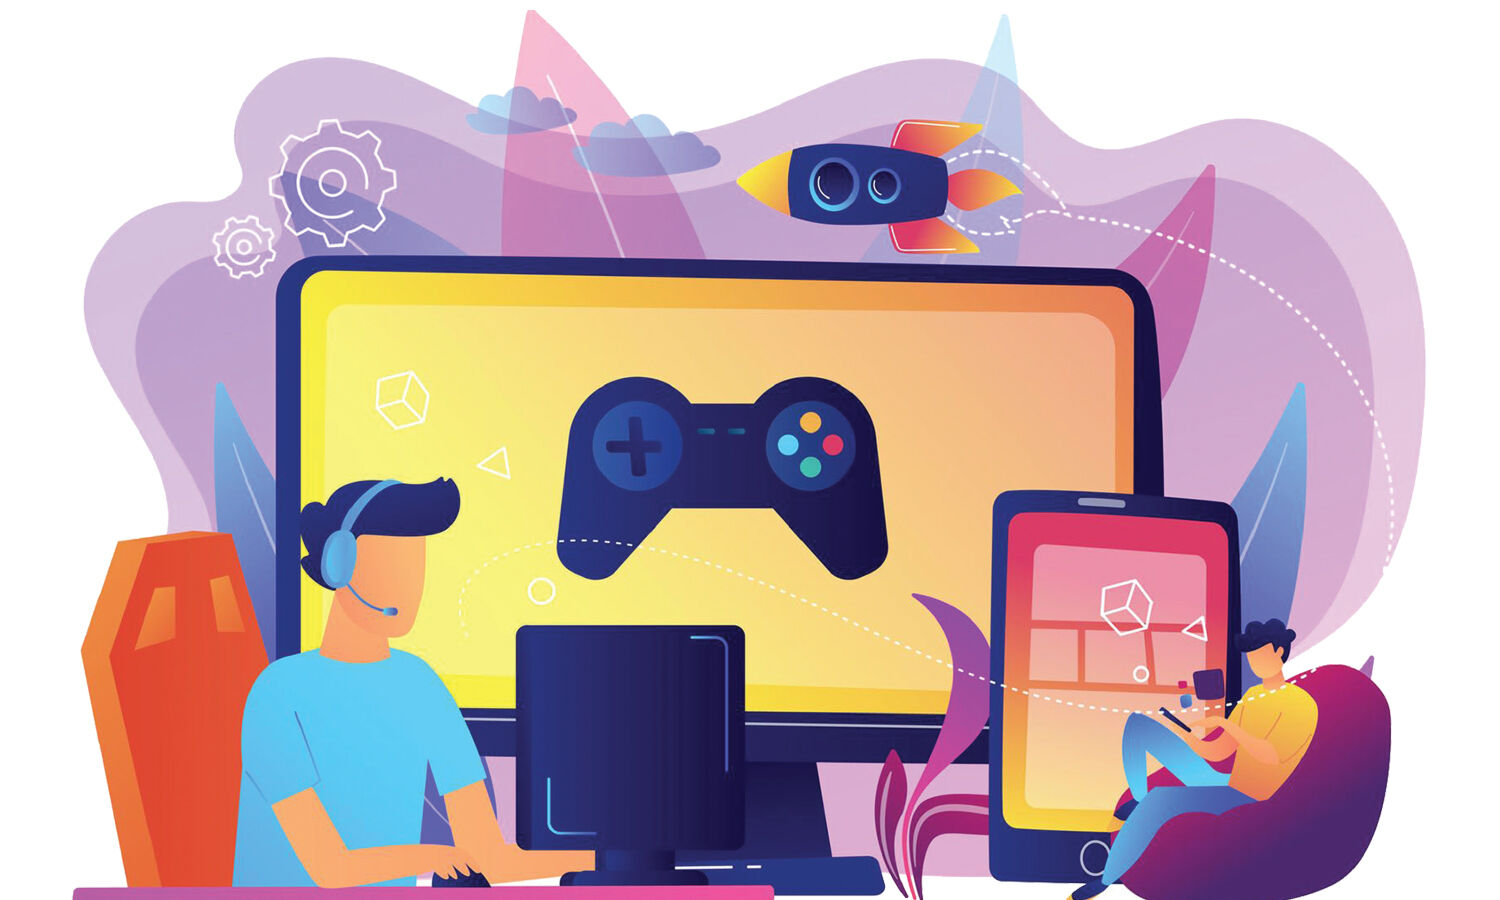 Real Money Games Taking Center Stage in Online Gaming - Artoon